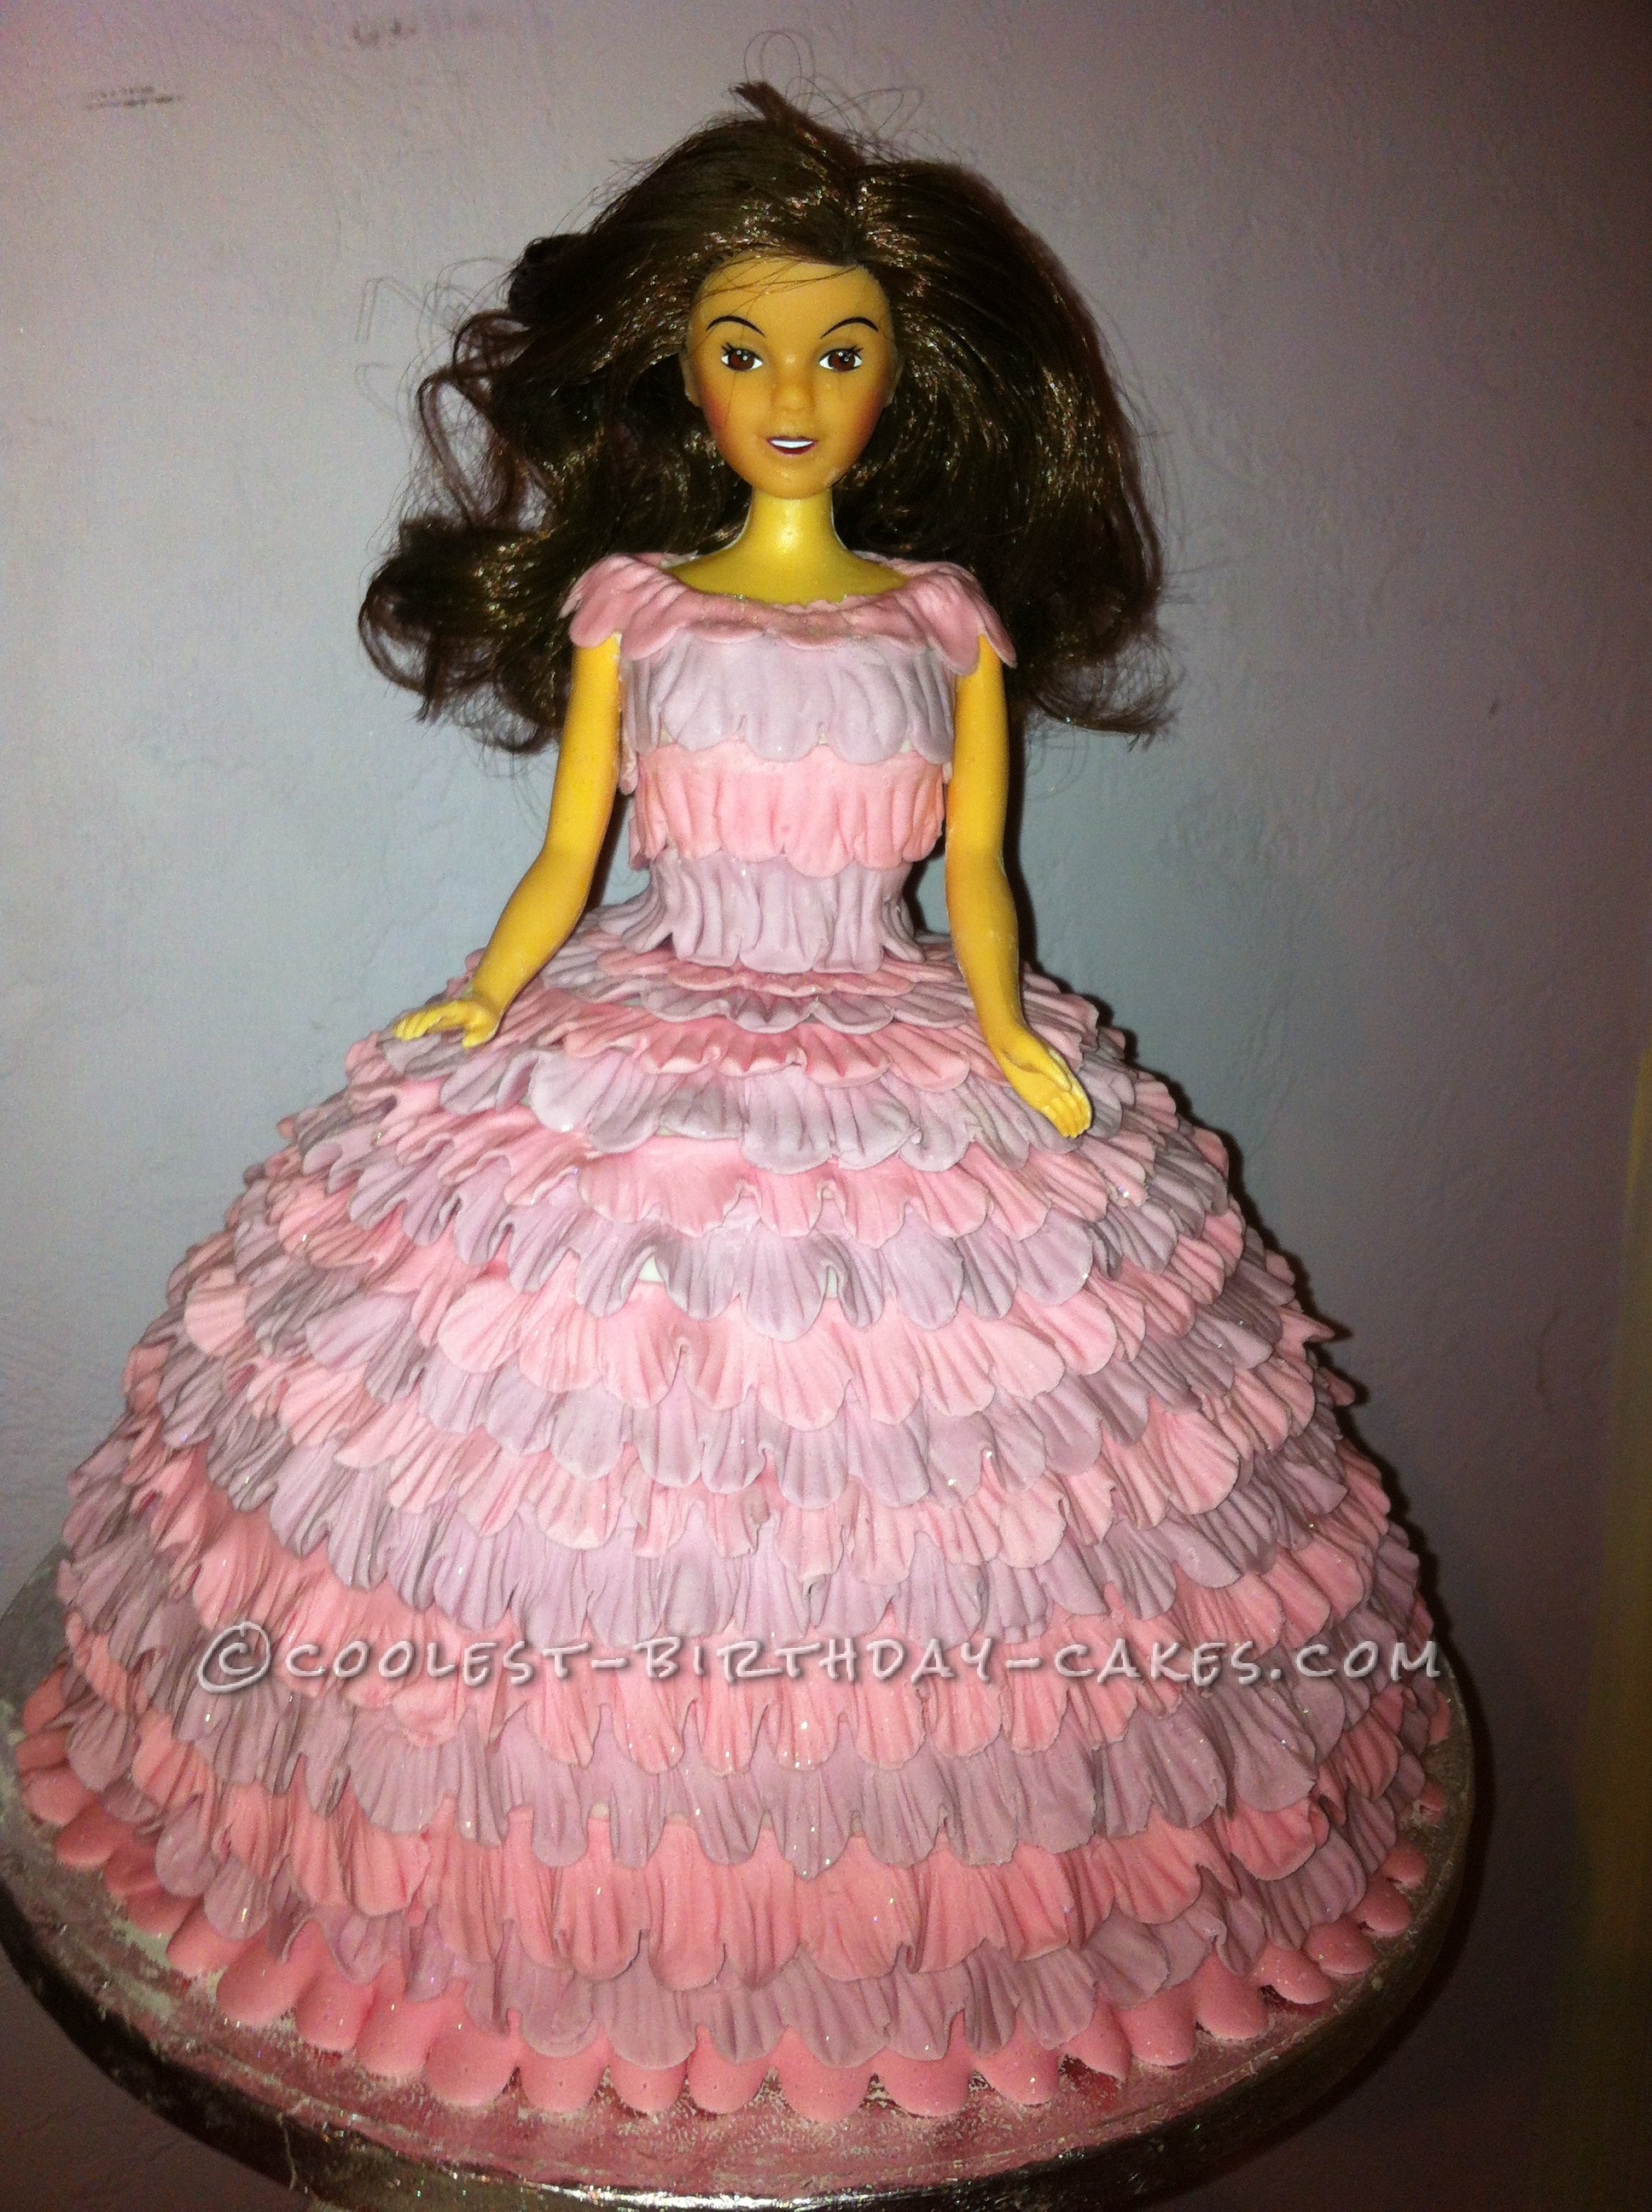 Cool Ball Gown Doll Birthday Cake